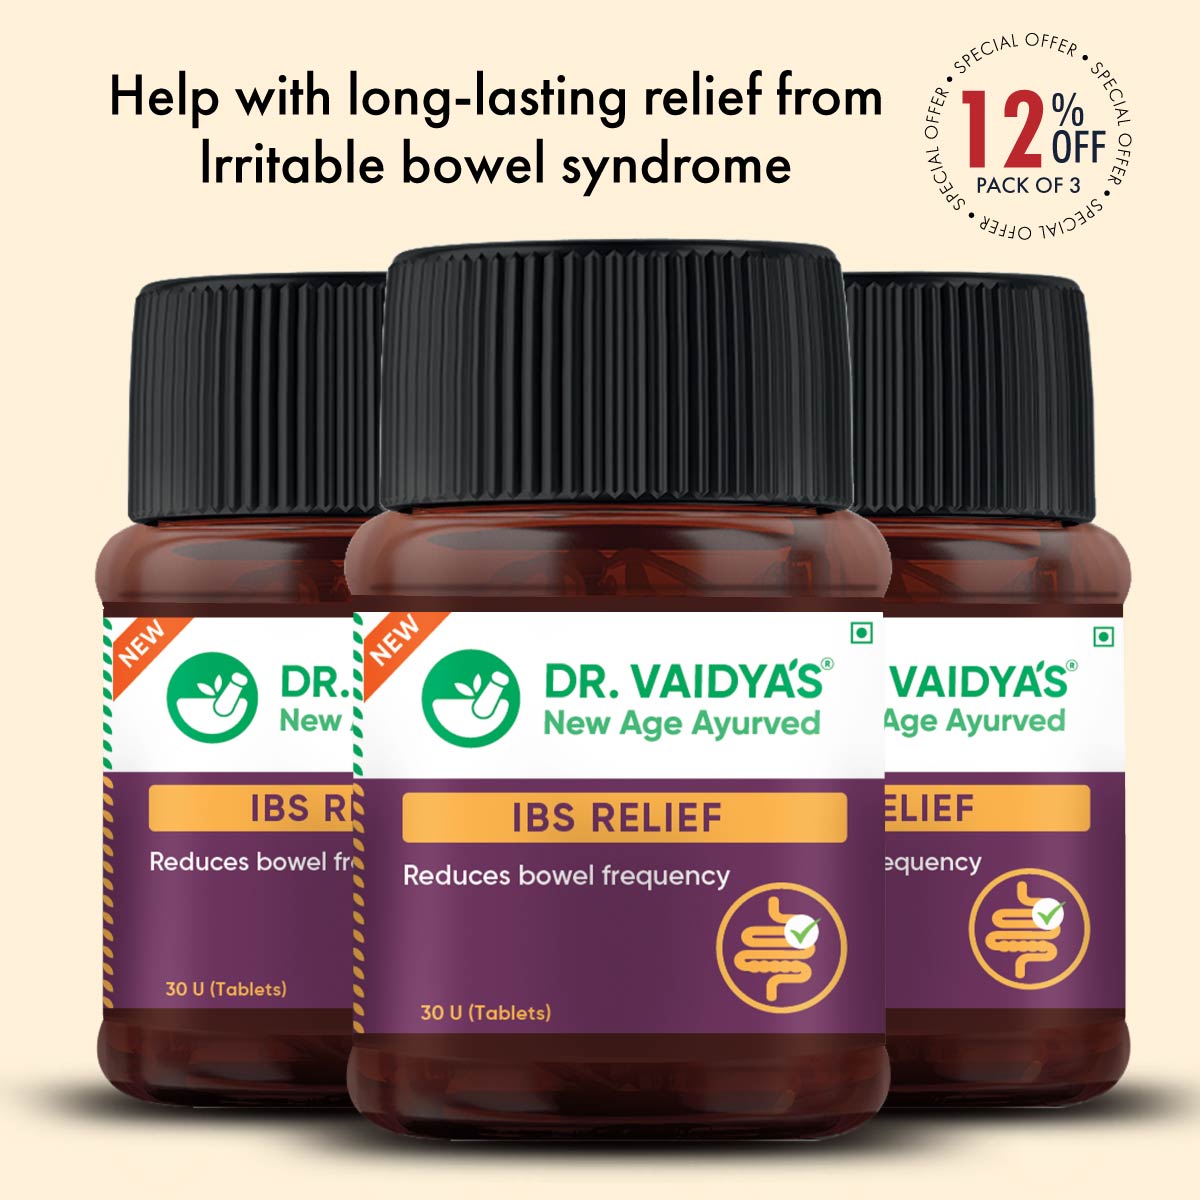 IBS Relief: Helps Relieve Cramps, Bloating & Normalize Bowel Movements